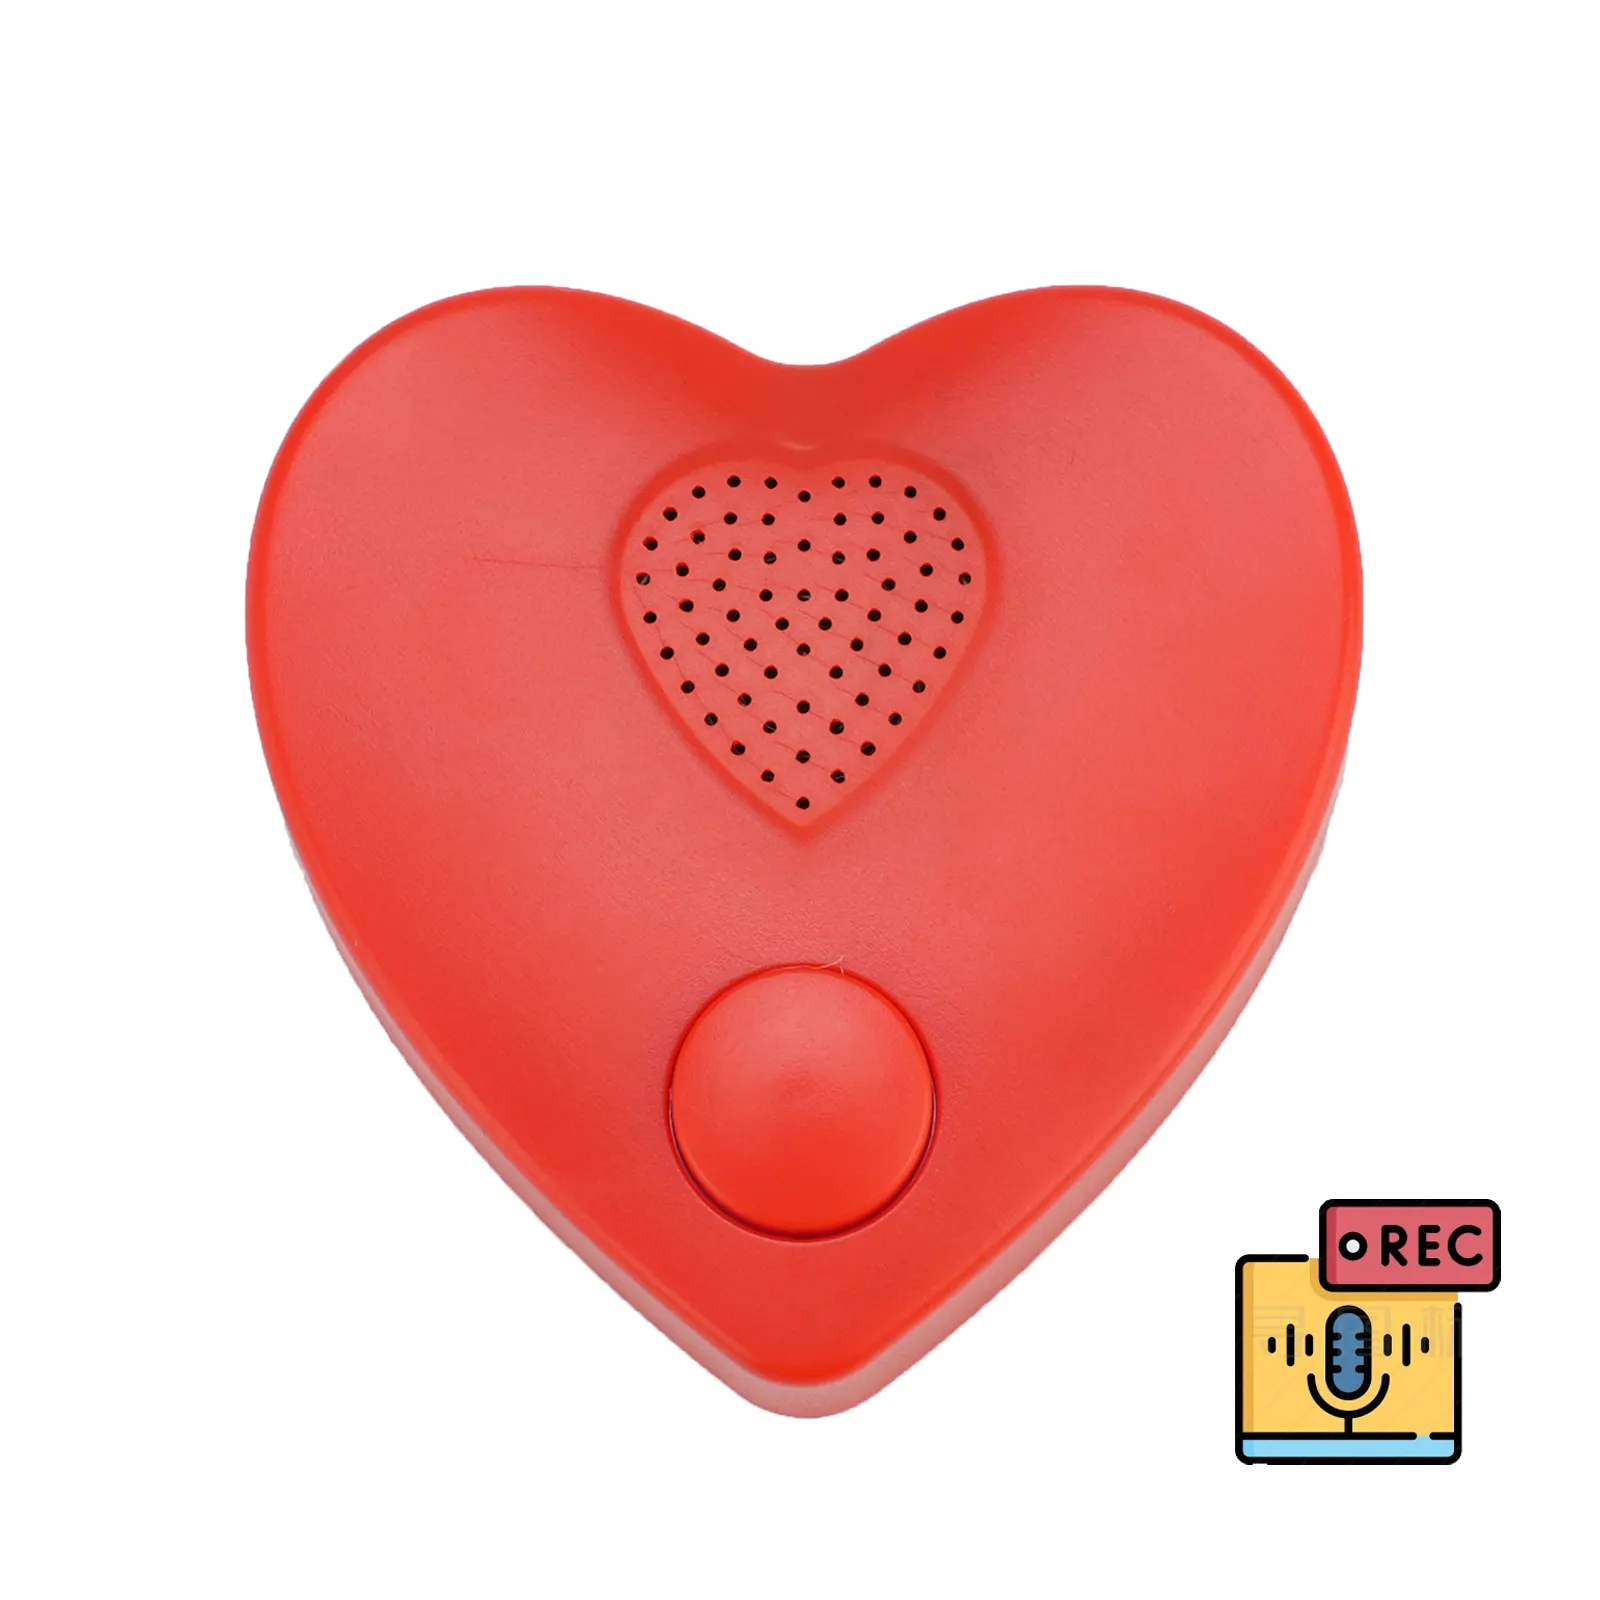 Customized Message Recordable Heart Shape Voice Recorder Plastic Sound Box Music Module for Plush Toys Stuffed Animals Pillows